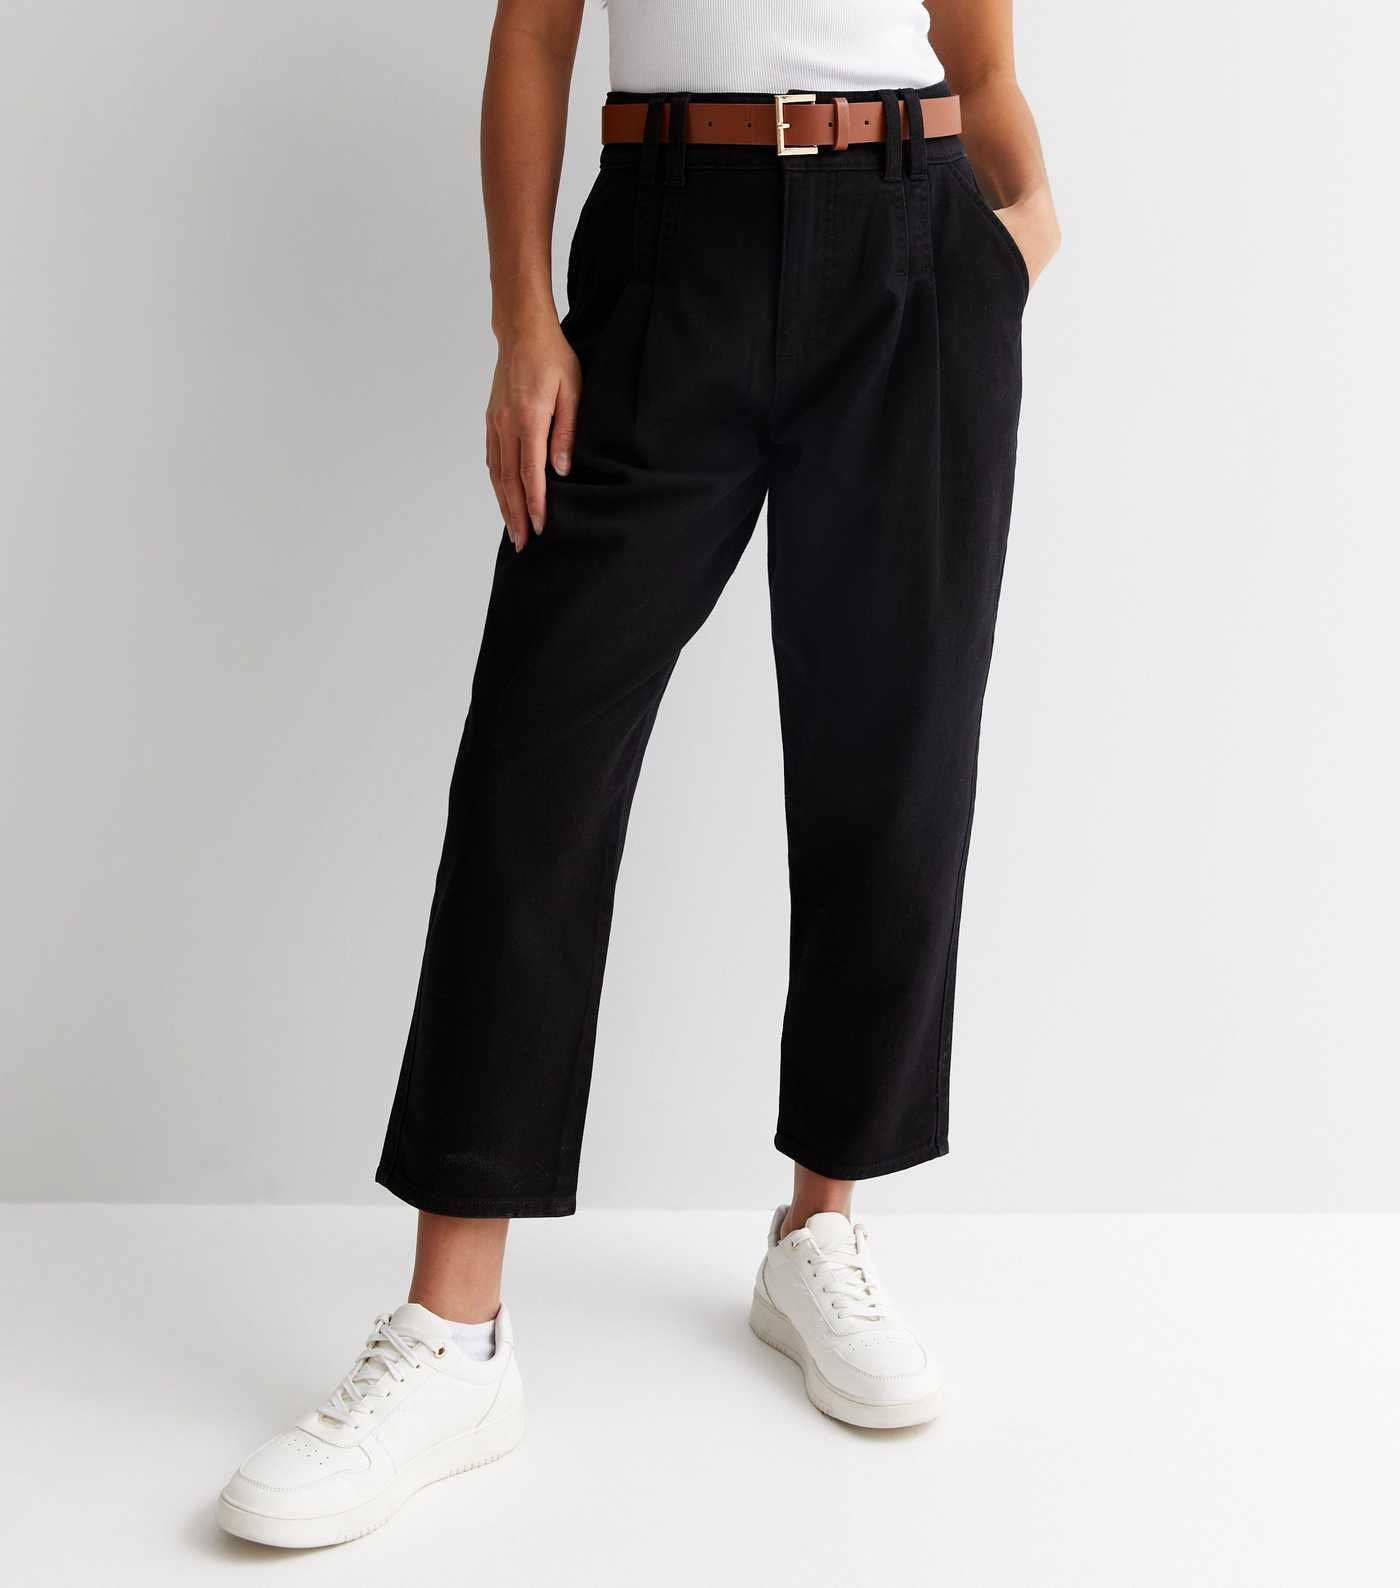 Petite Black Cotton Belted Crop Trousers
						
						Add to Saved Items
						Remove from Saved ... | New Look (UK)